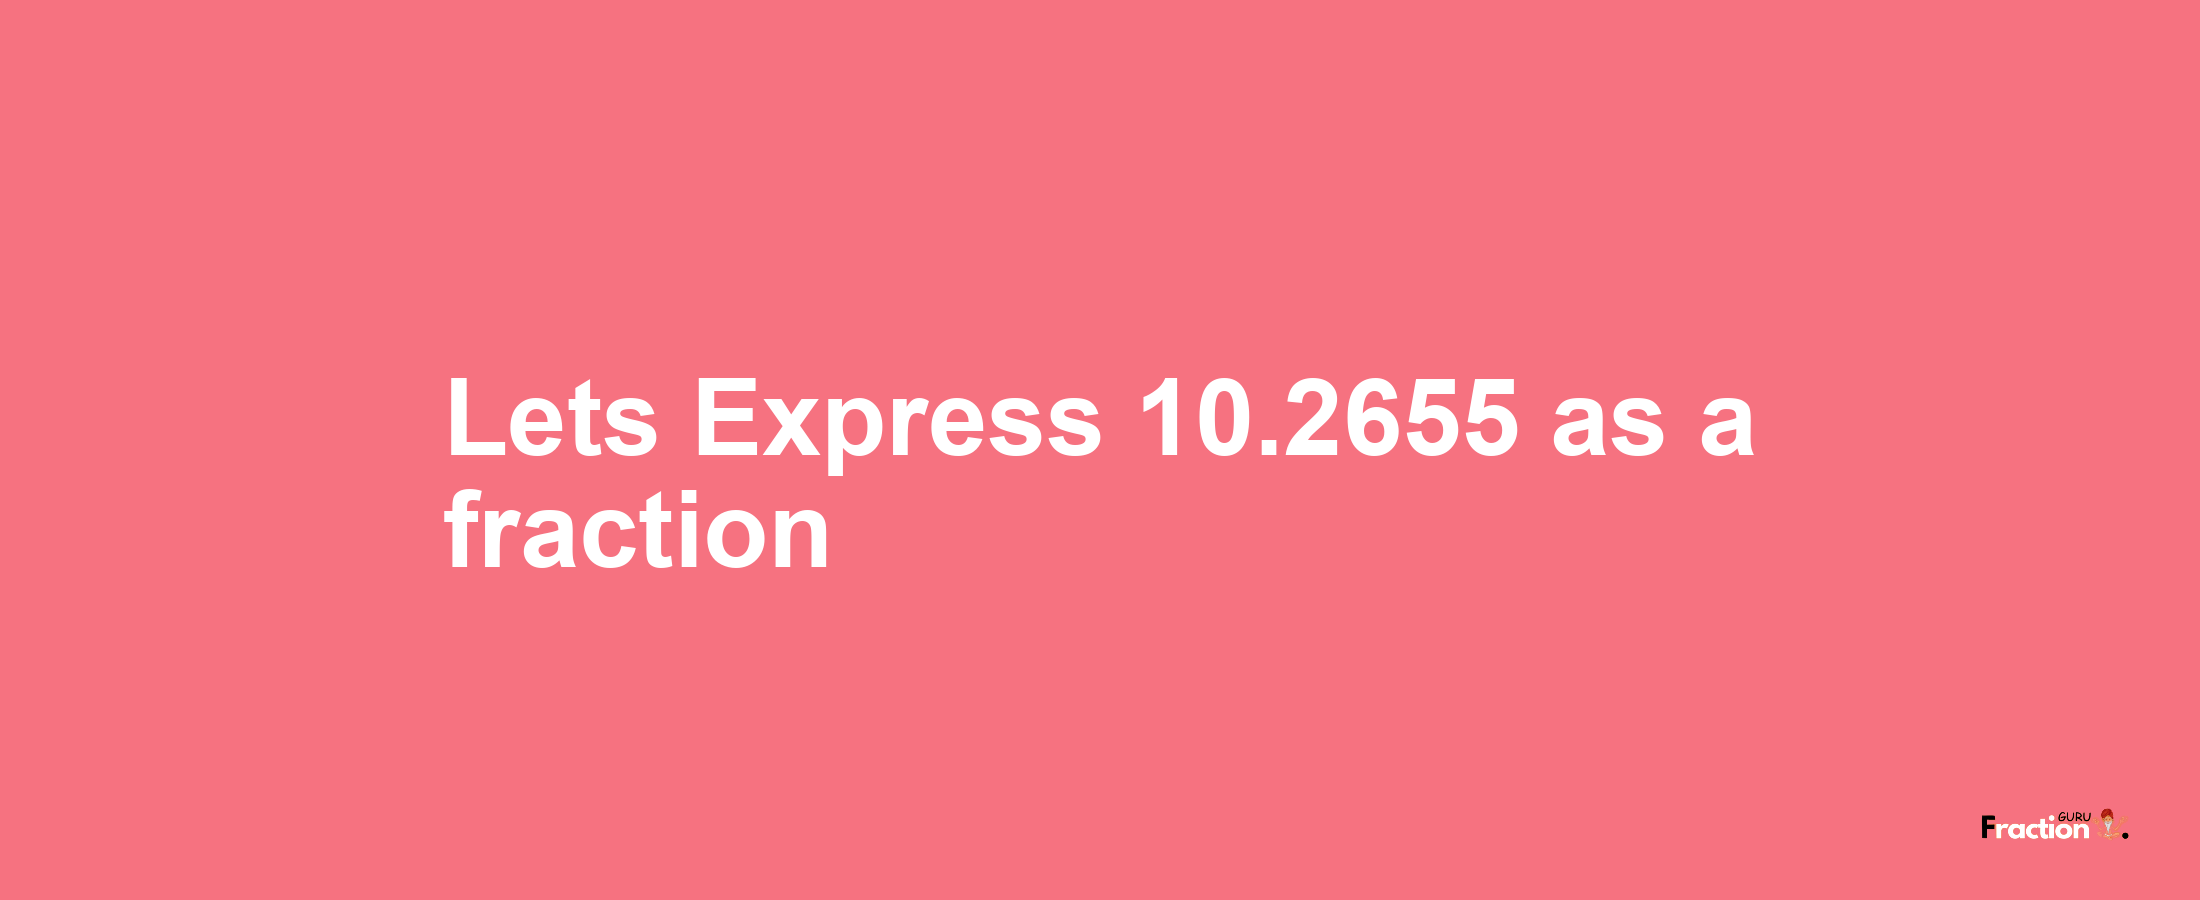 Lets Express 10.2655 as afraction